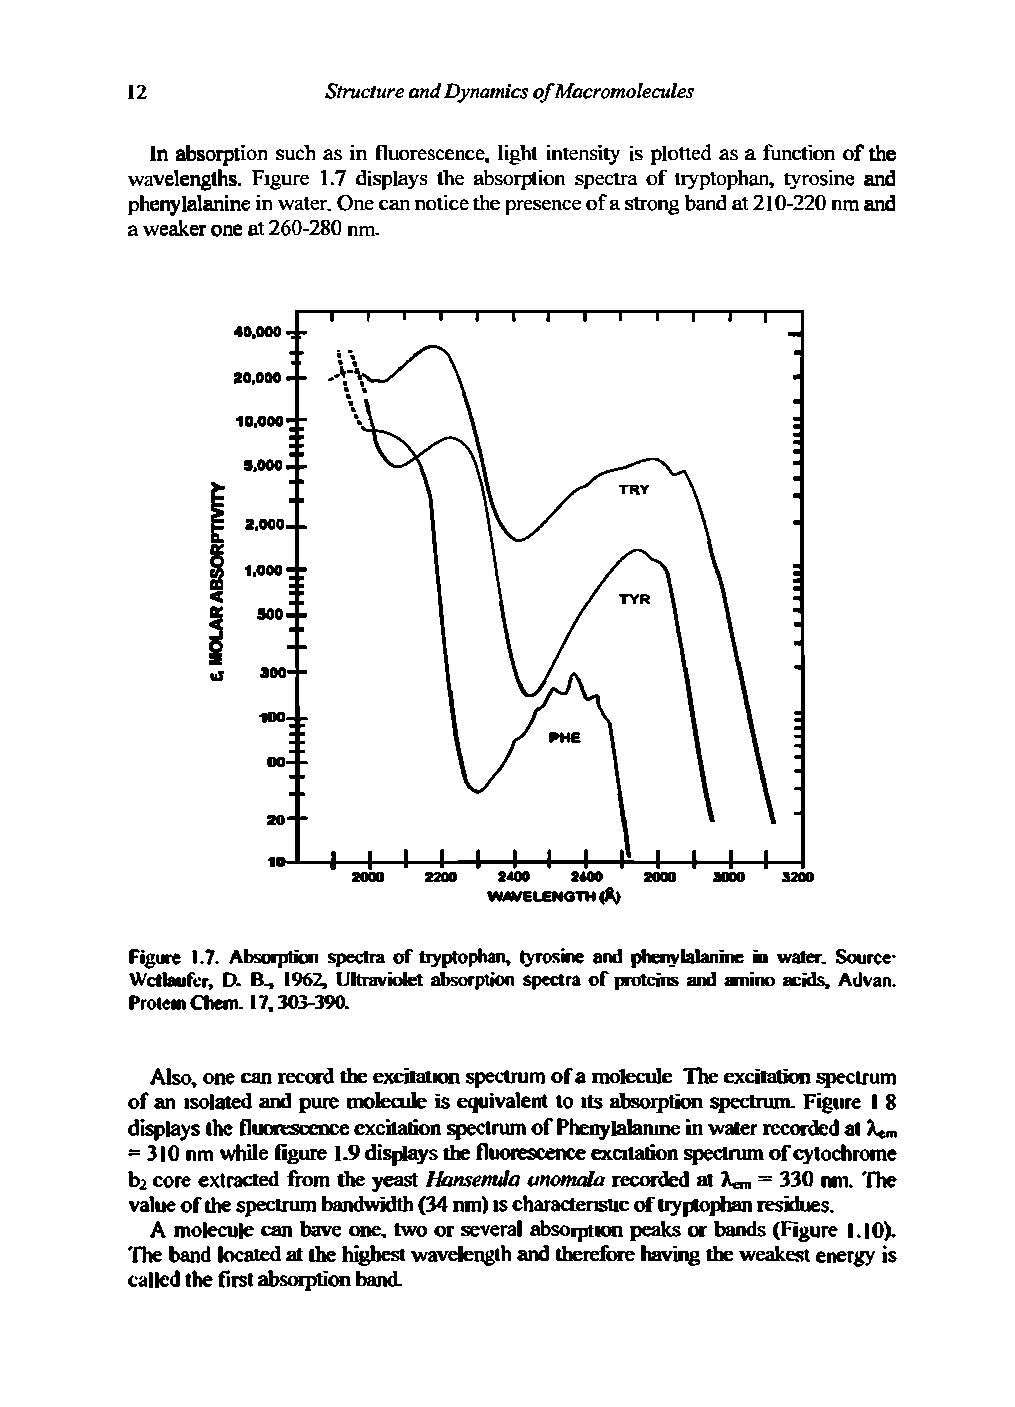 Figure 1.7. Absoqition spectra of tiyptophan, tyrosine and phenylalanhi Wctbufcr, D. B., 1962, Ultraviolet absorption spectra of proteins and a Protein Ghent. l7.303-39a...